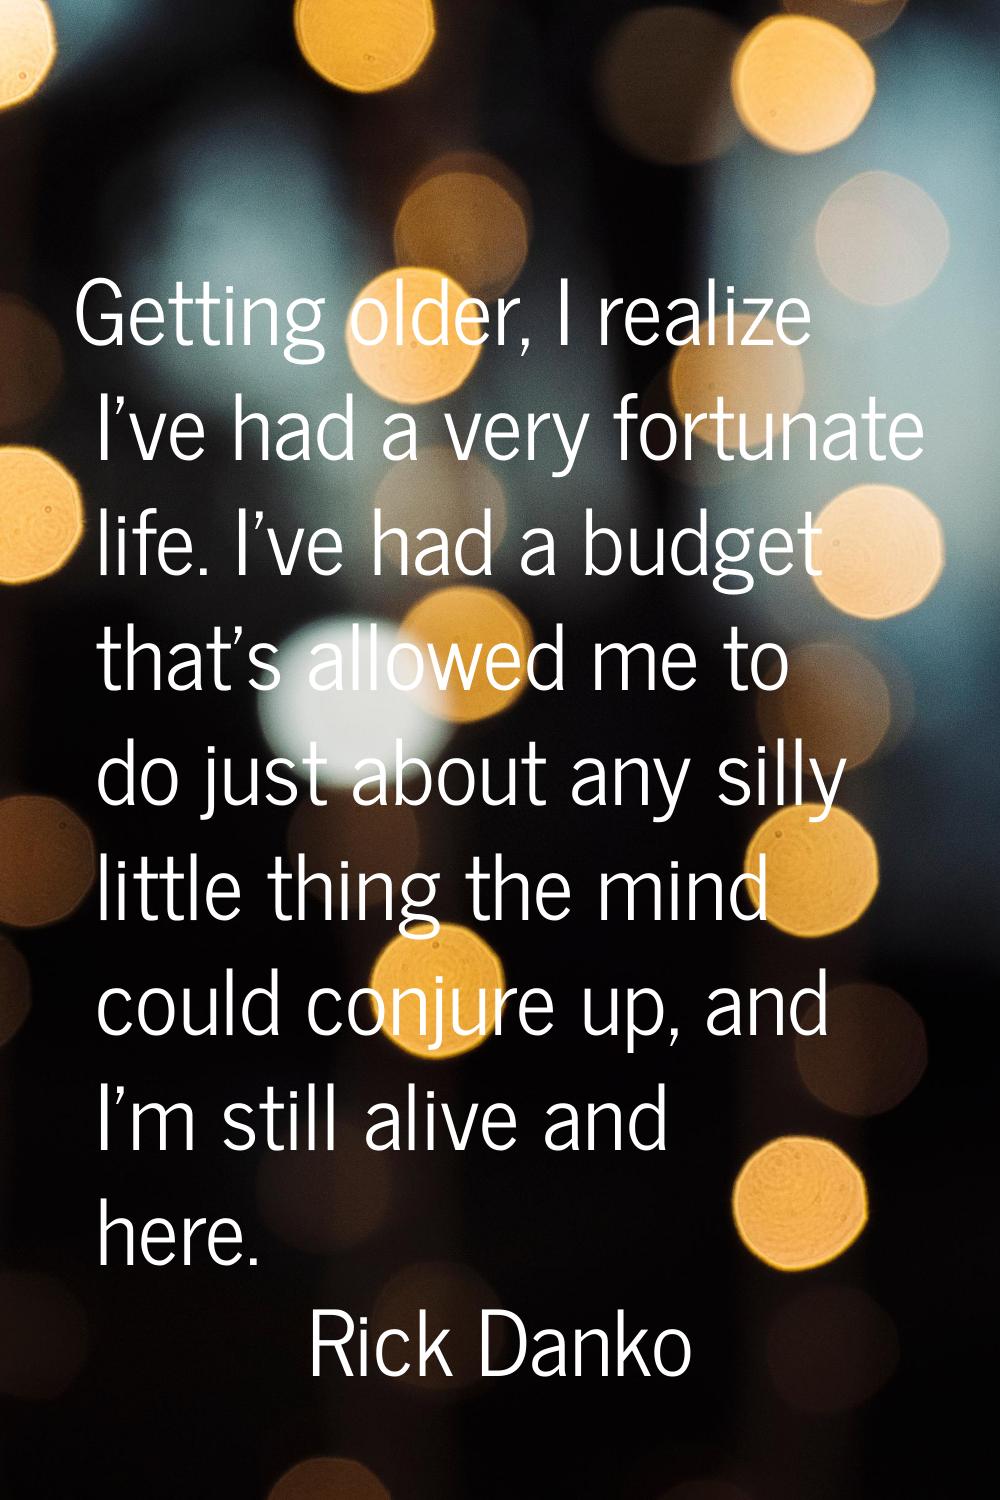 Getting older, I realize I've had a very fortunate life. I've had a budget that's allowed me to do 